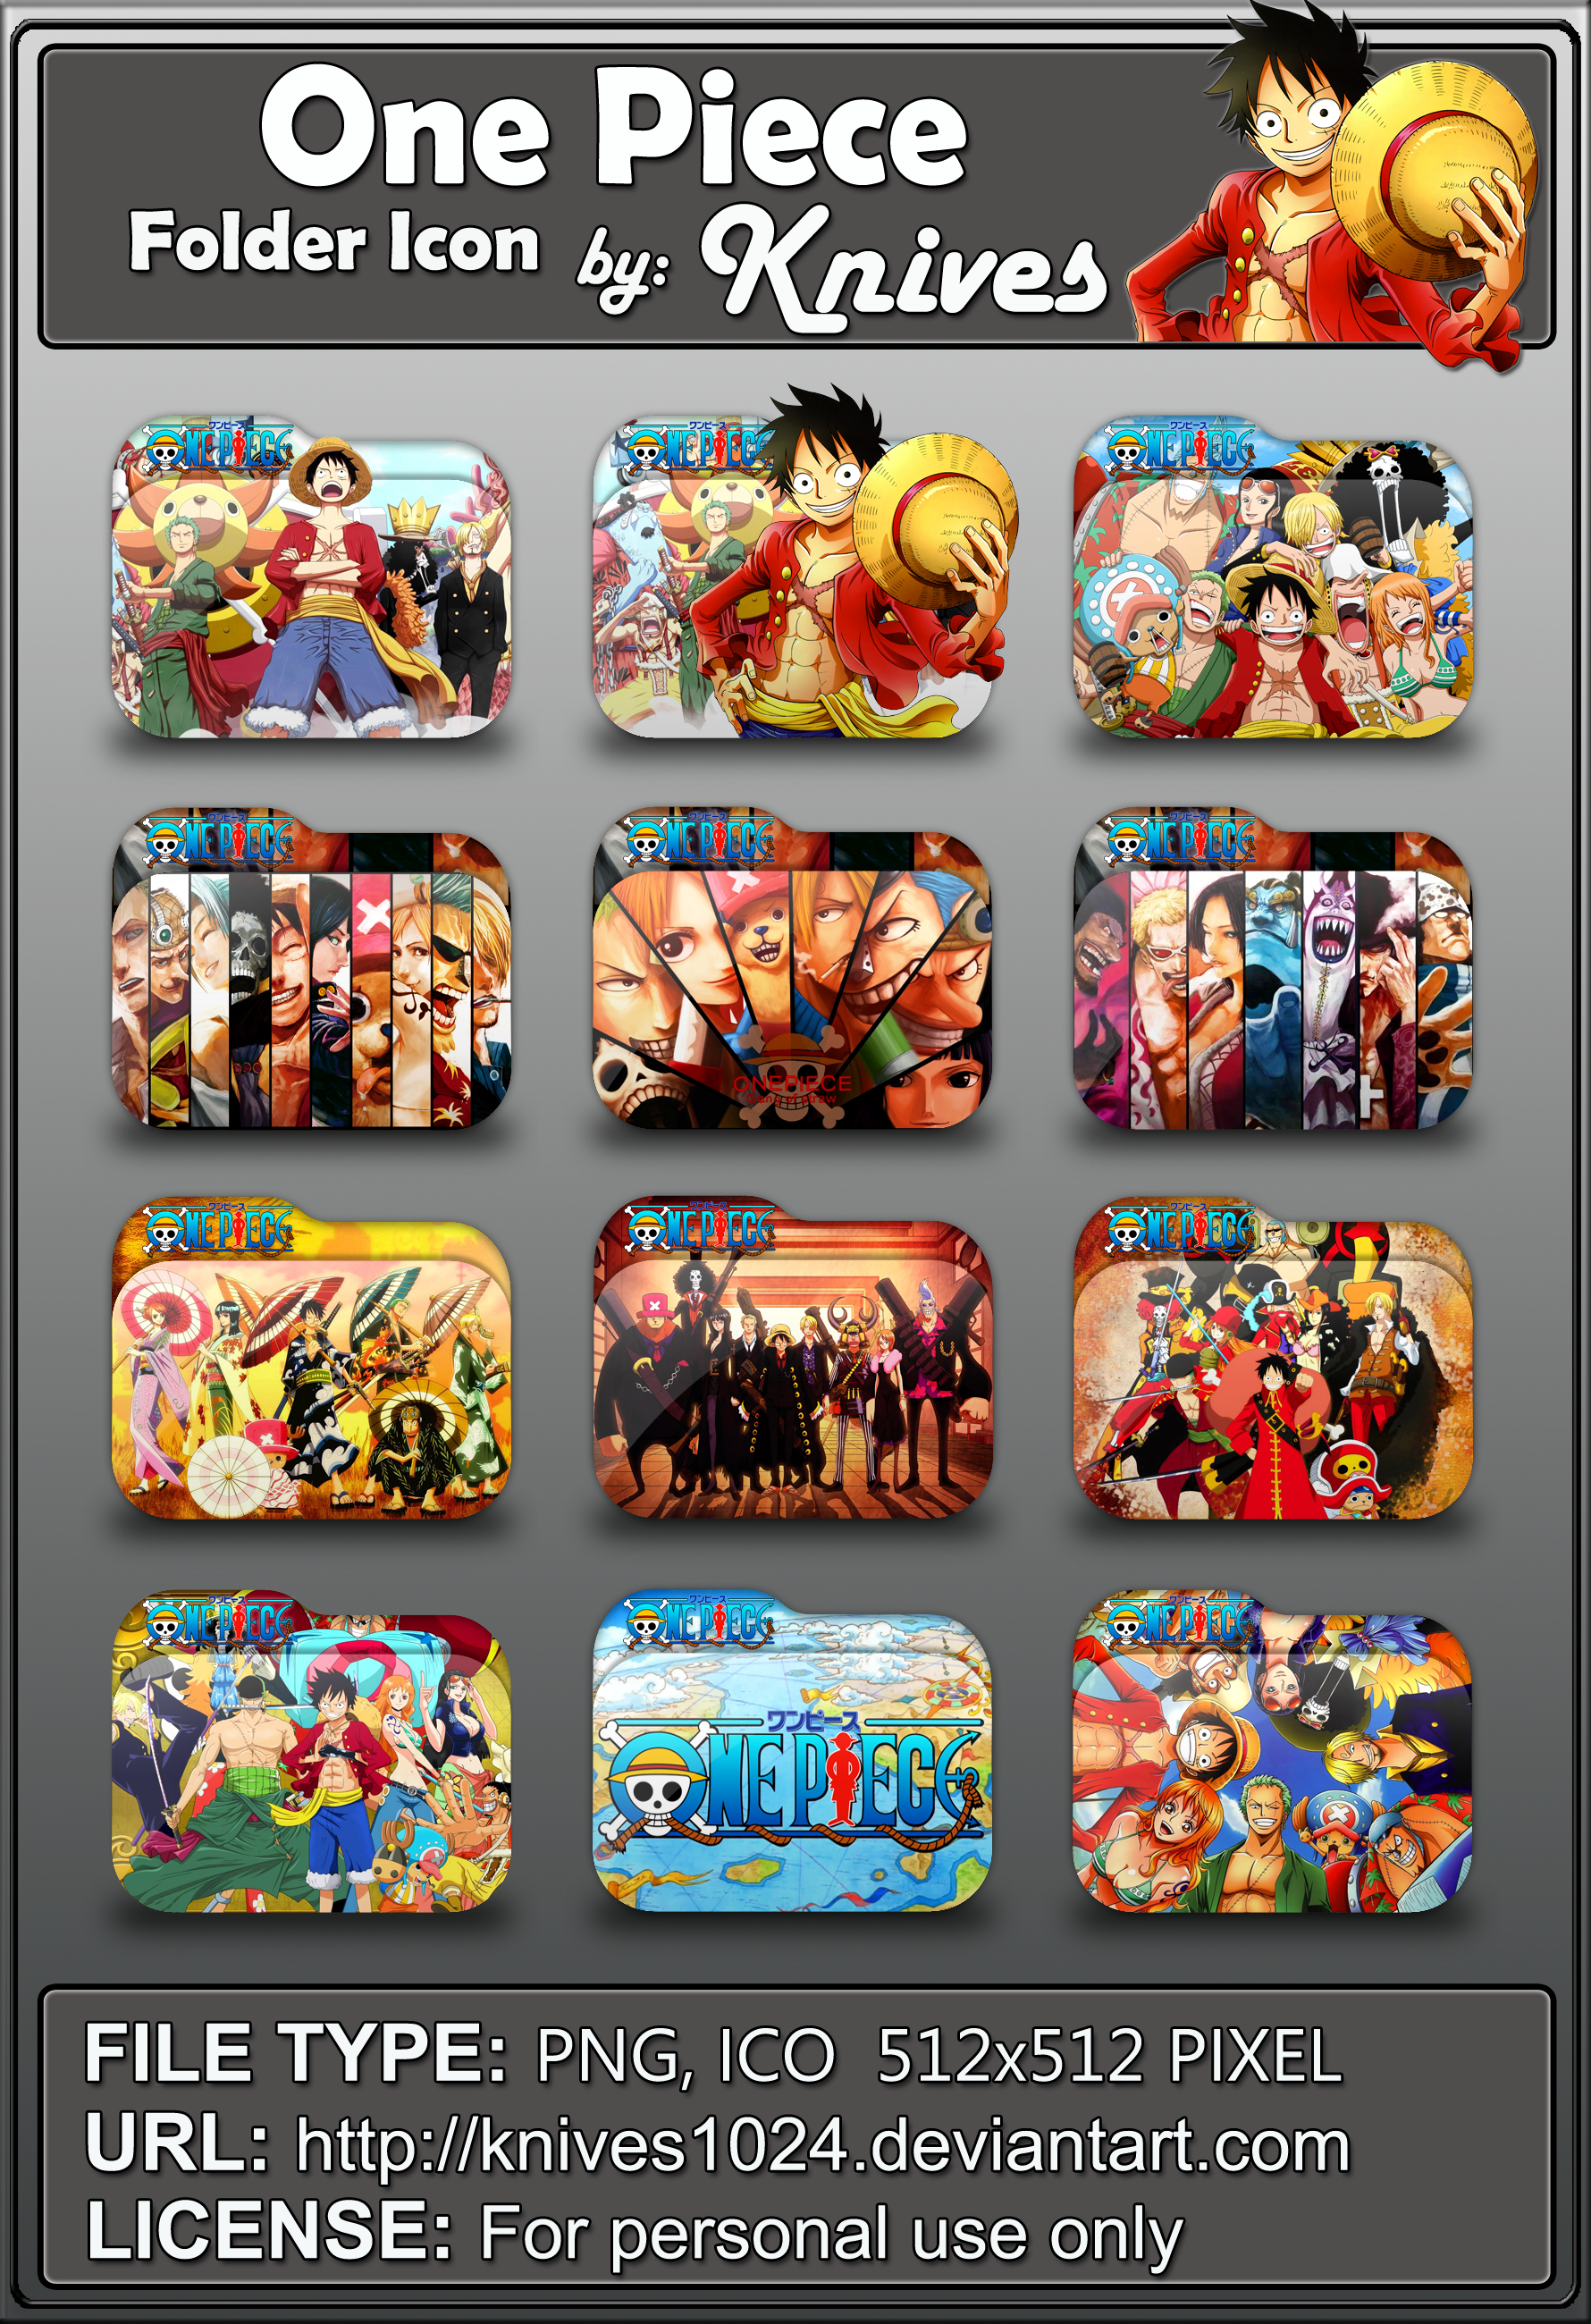 One Piece Anime Folder Icon By Knives By Knives1024 On DeviantArt